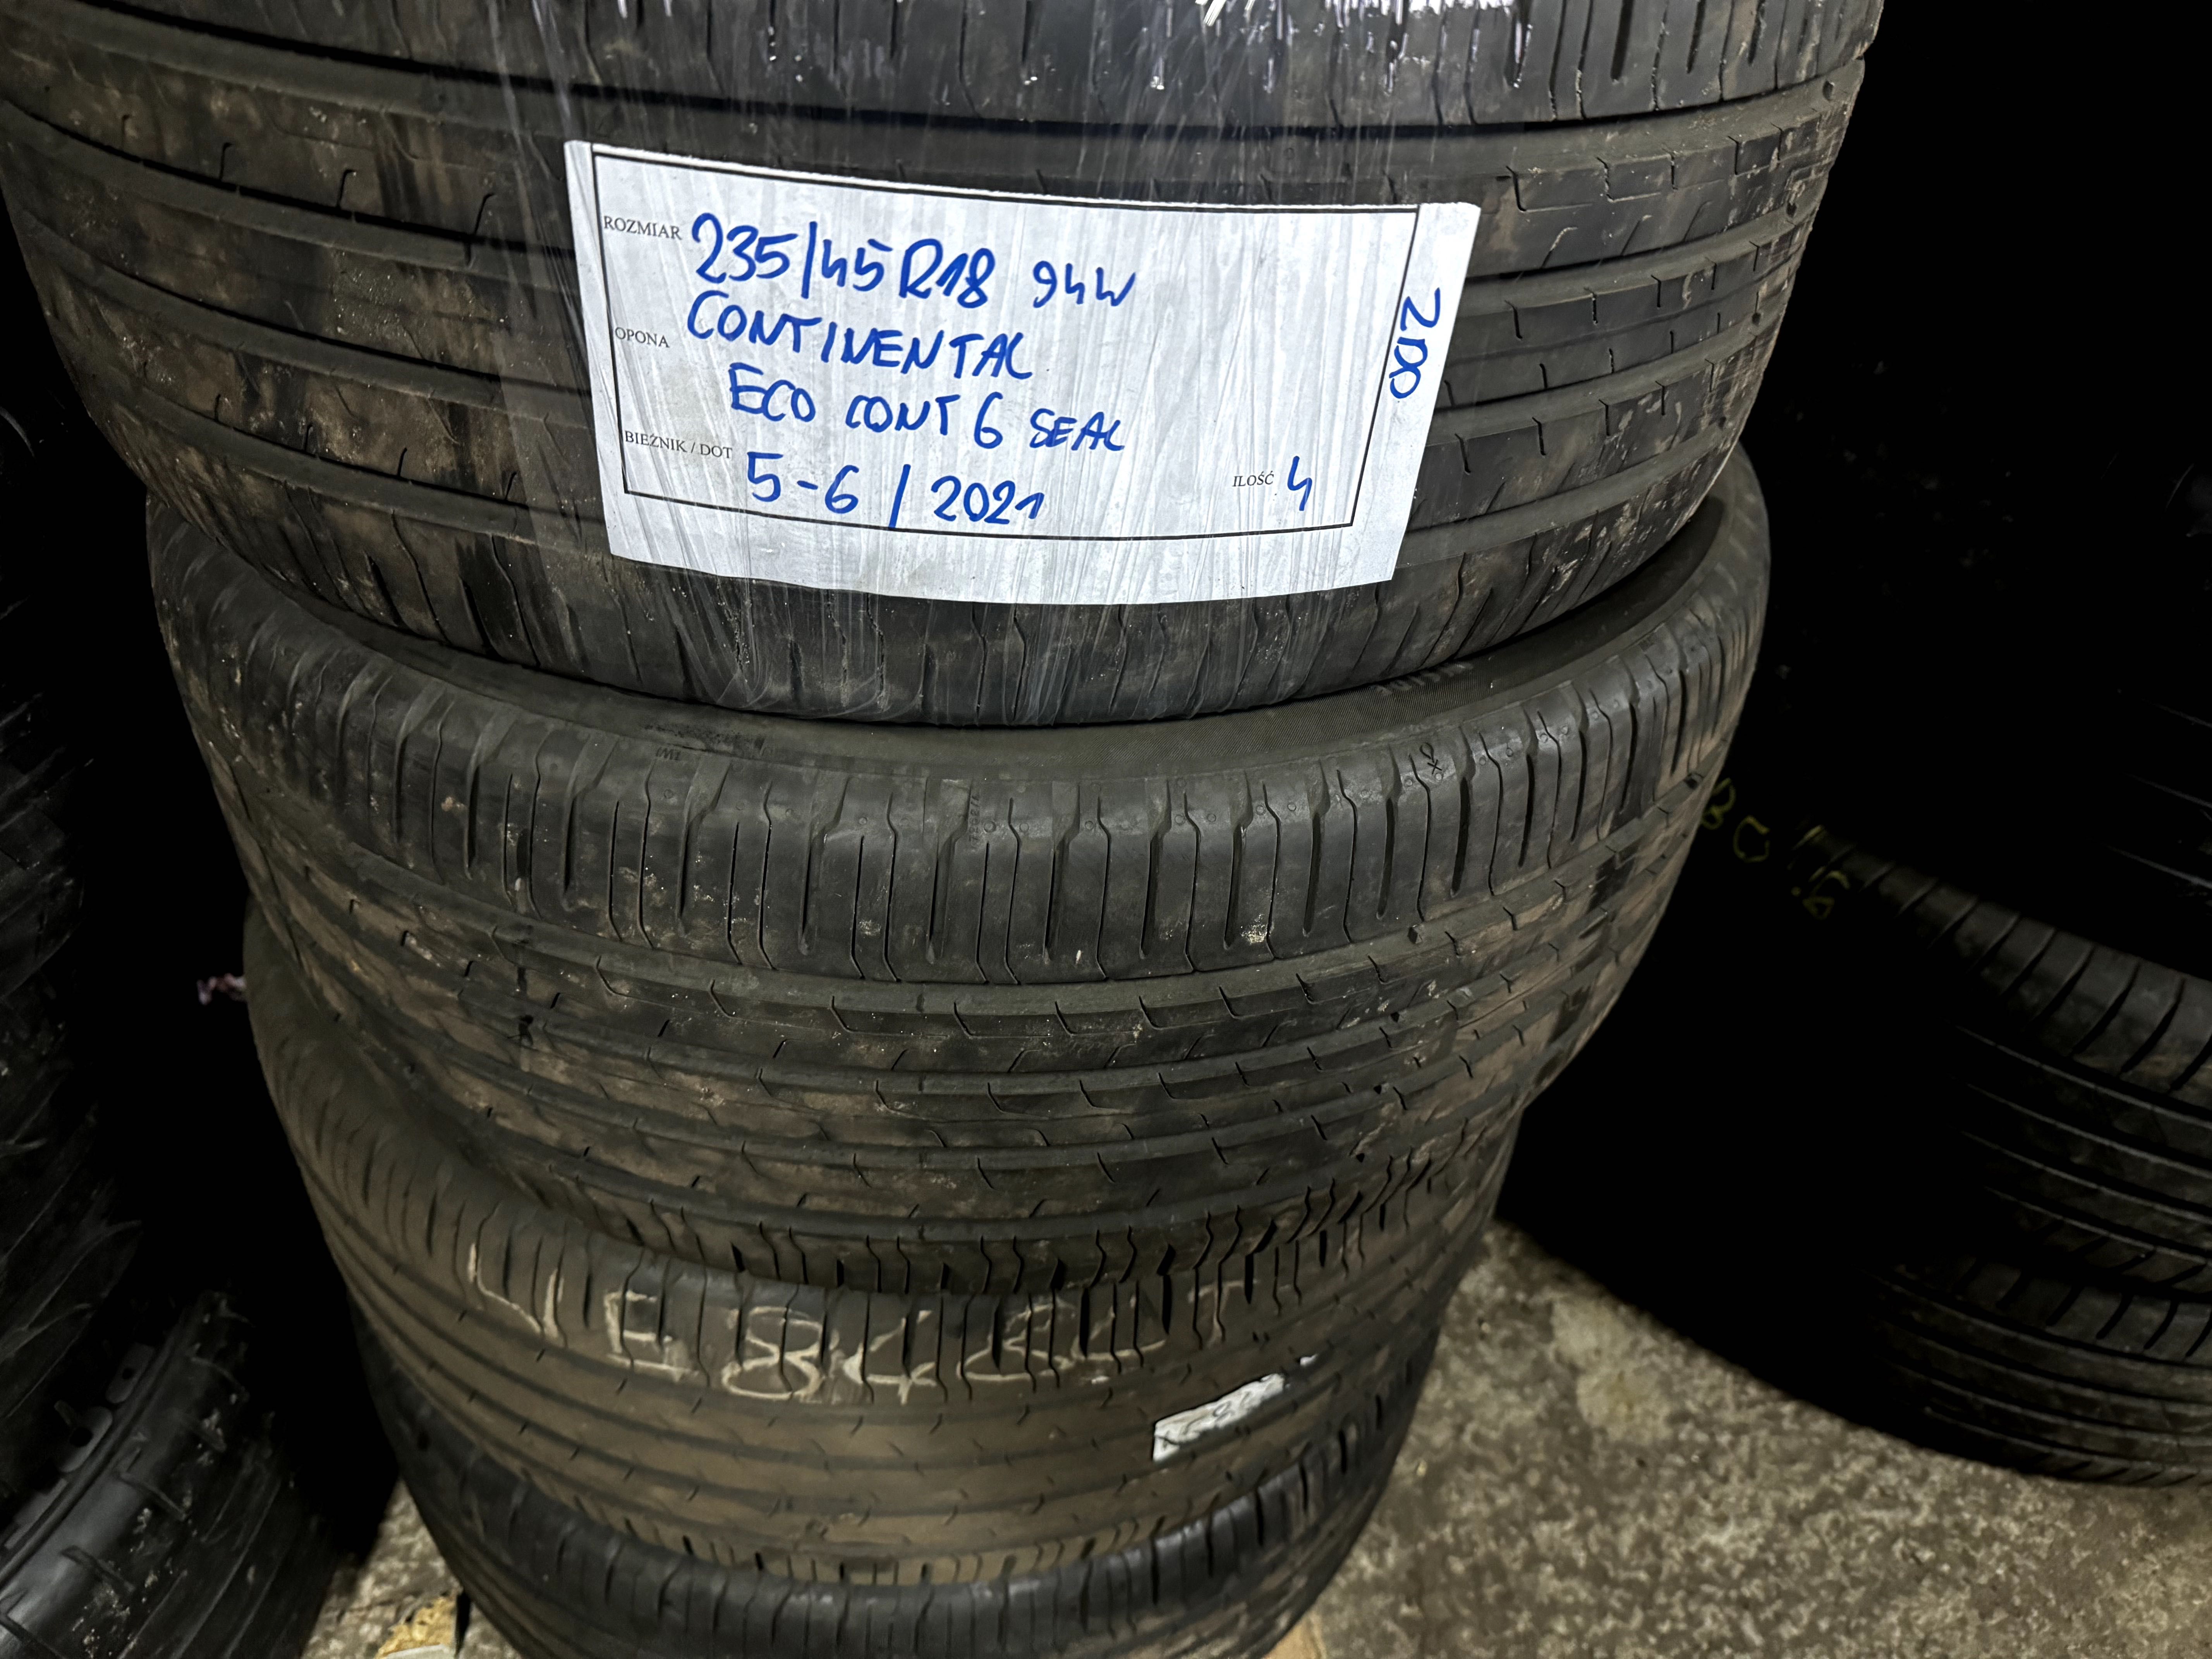 4x 235/45R18 Continental EcoContact 6 seal / 2021r.